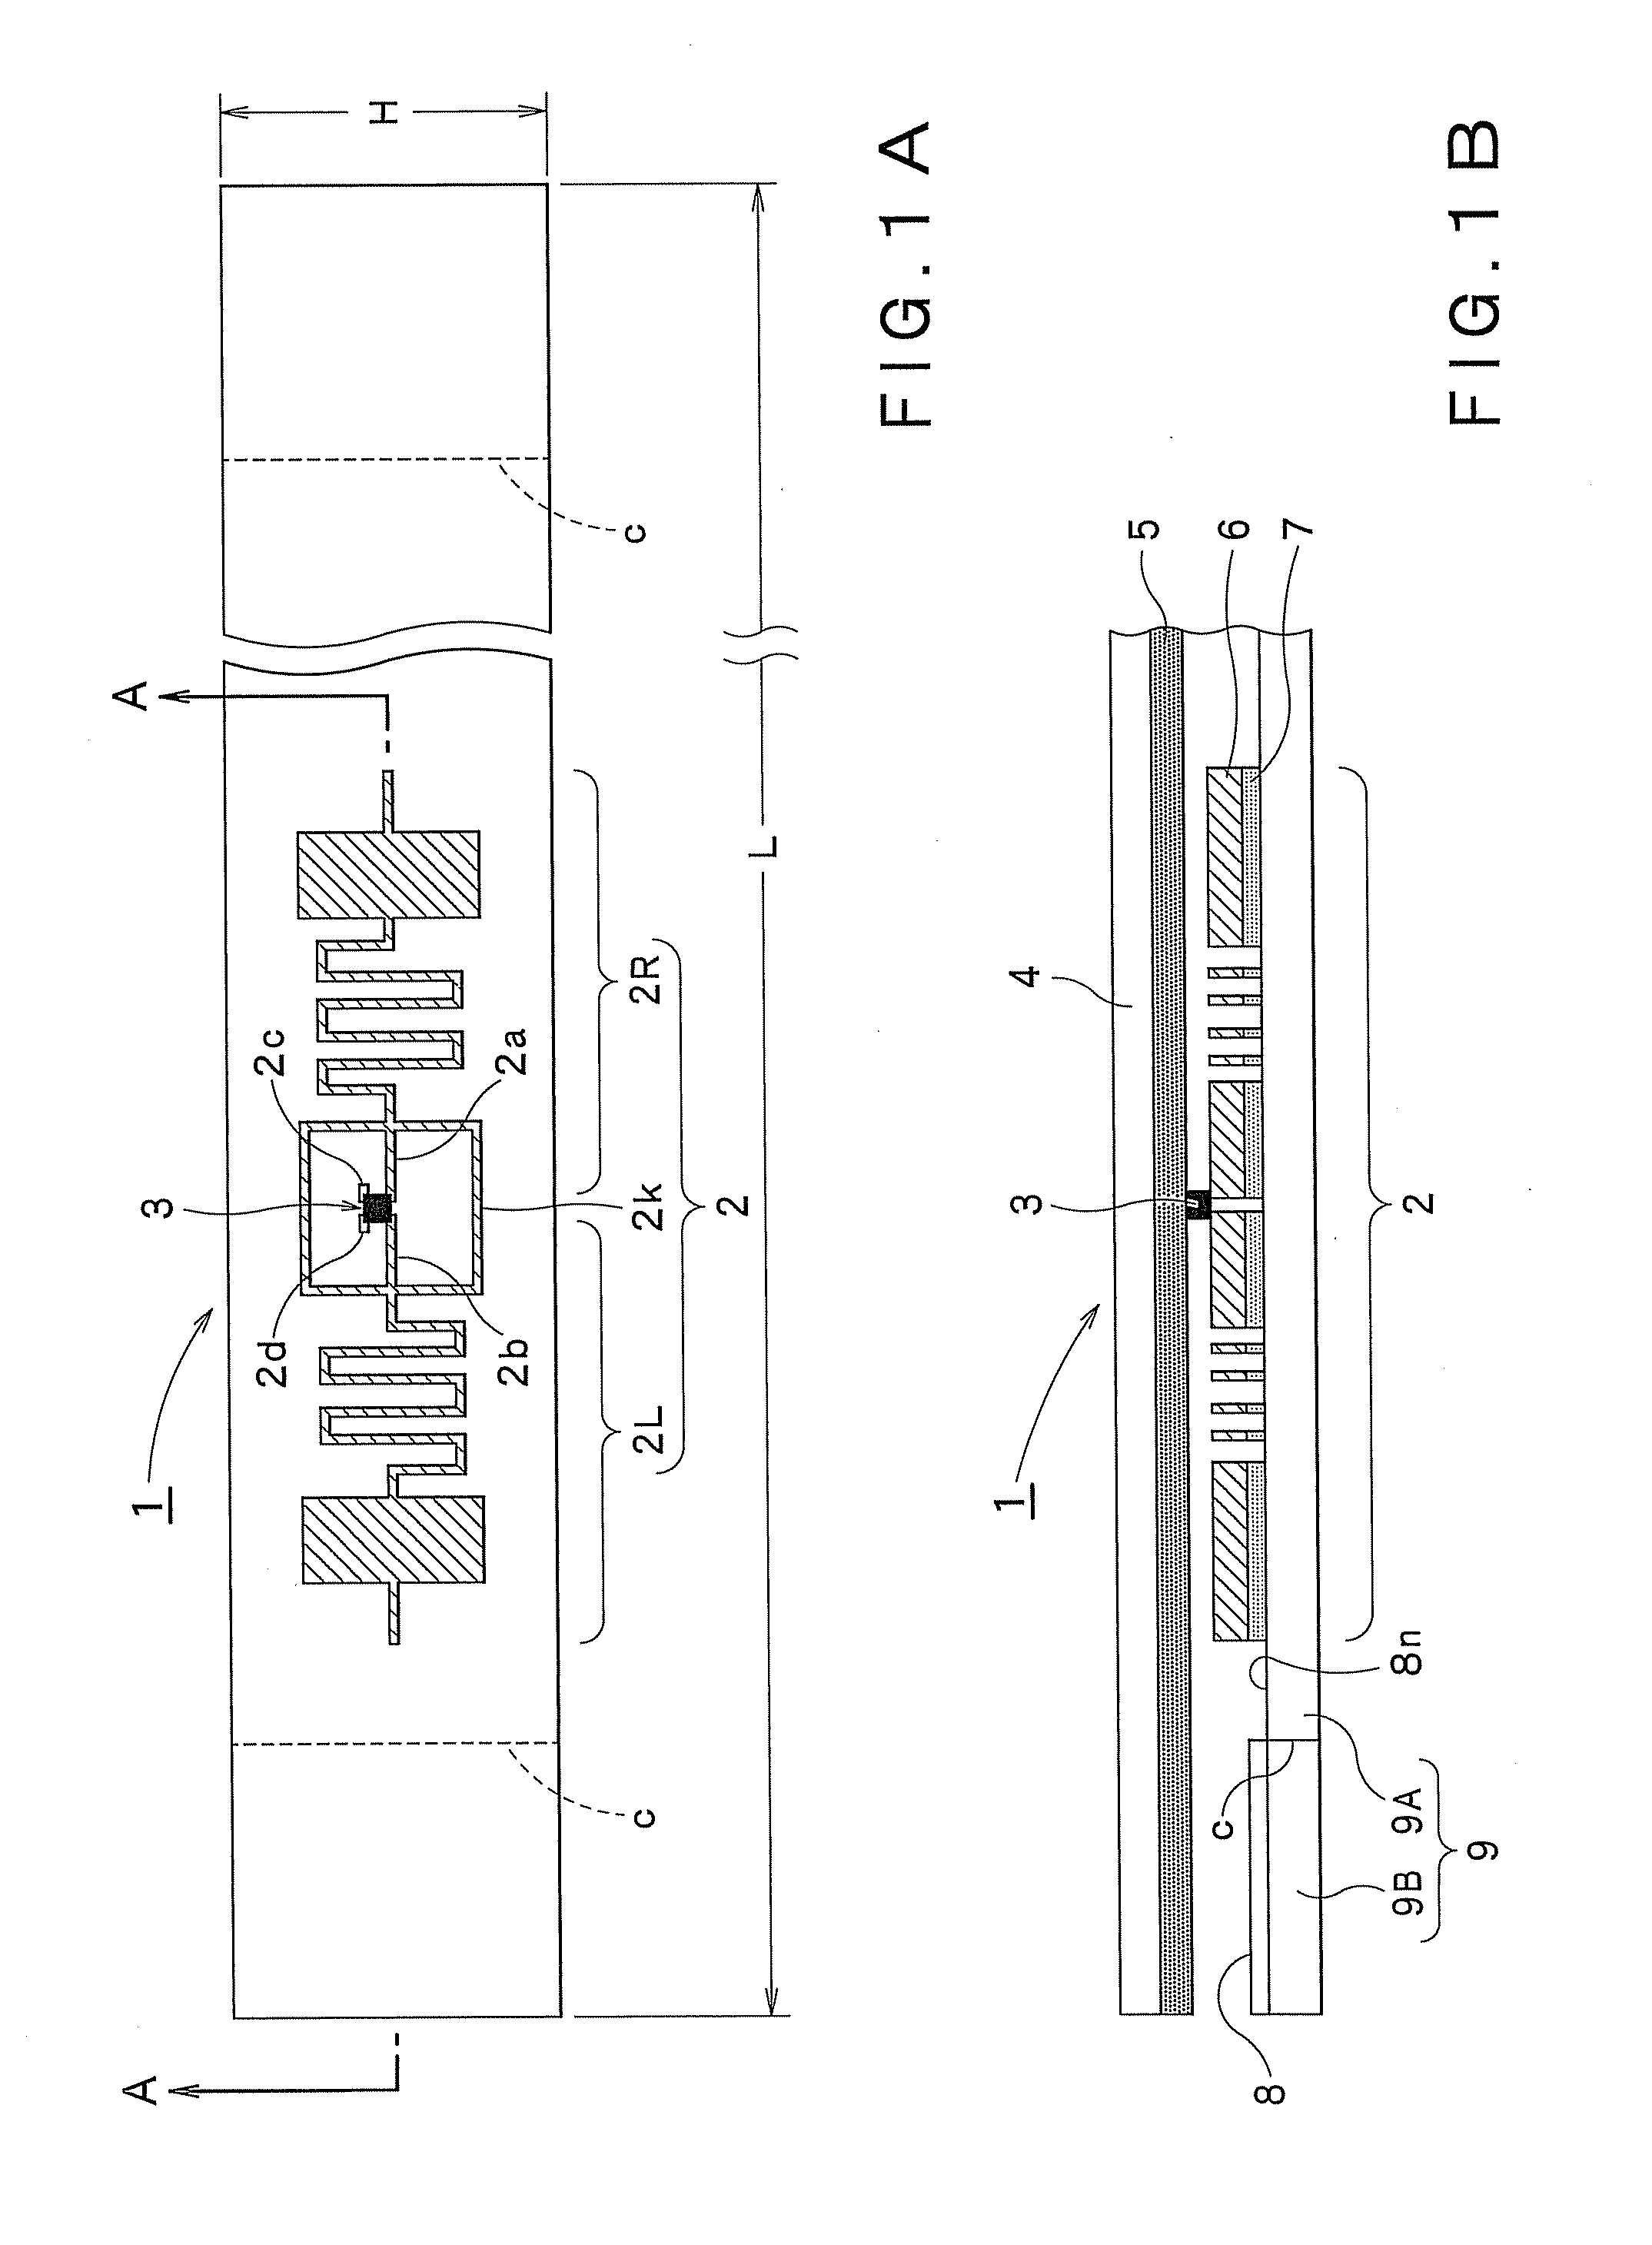 Noncontact IC tag label, airline baggage tag label, and manufacturing method for noncontact IC tag label